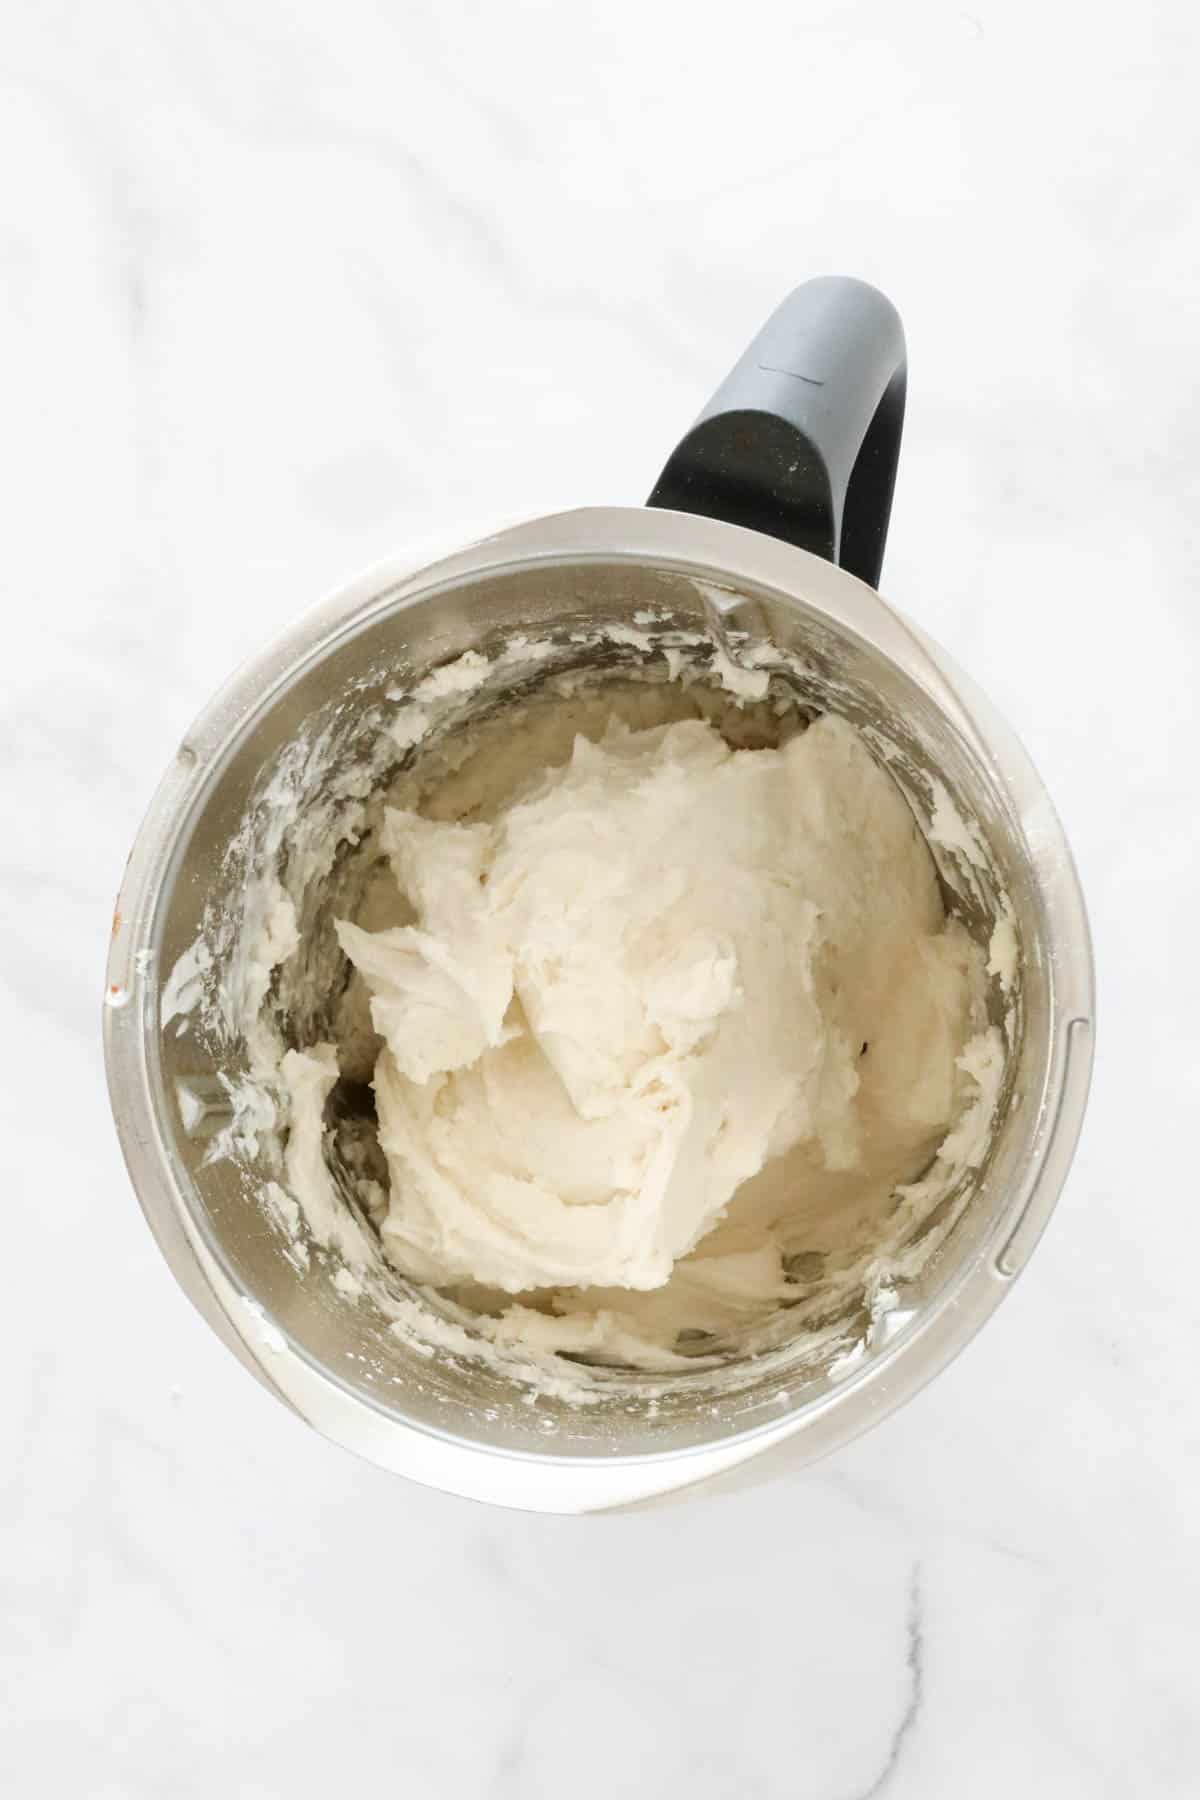 Dough in a Thermomix jug.